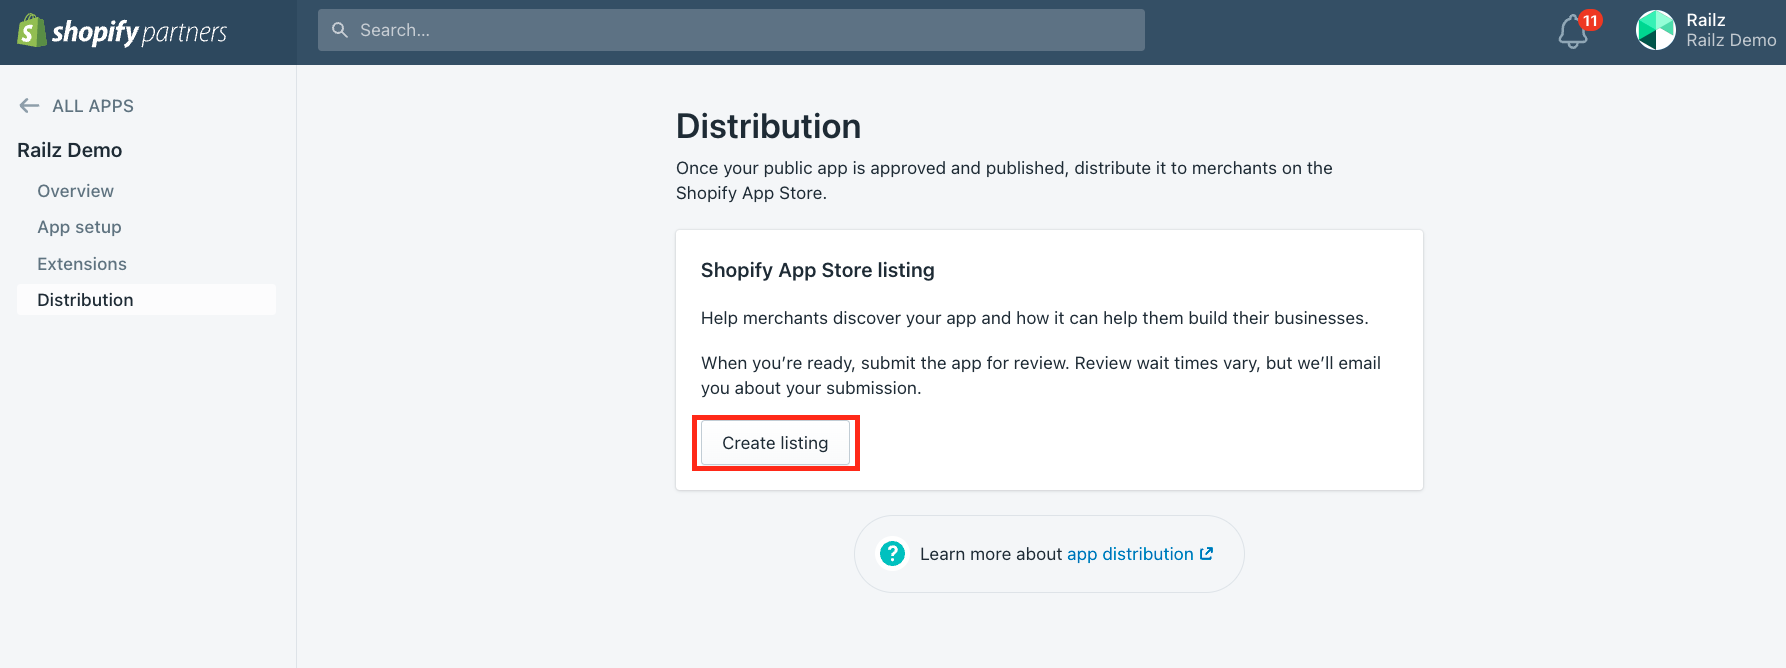 Shopify Partners - Choose App Distribution. Click to Expand.